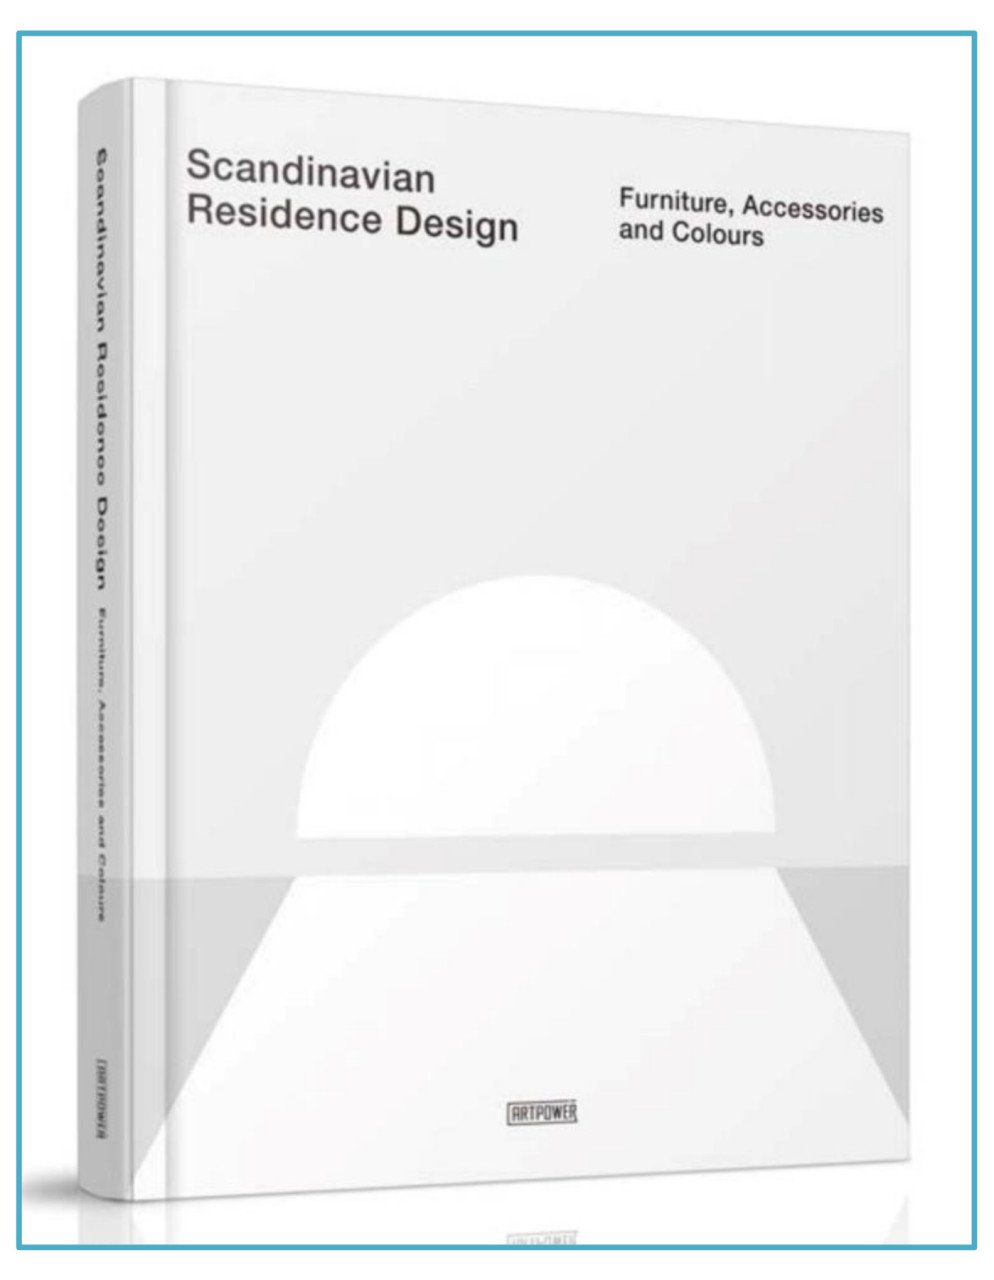 Scandinavian RESIDENCE DESIGN: Furniture, Accessories, and Colours